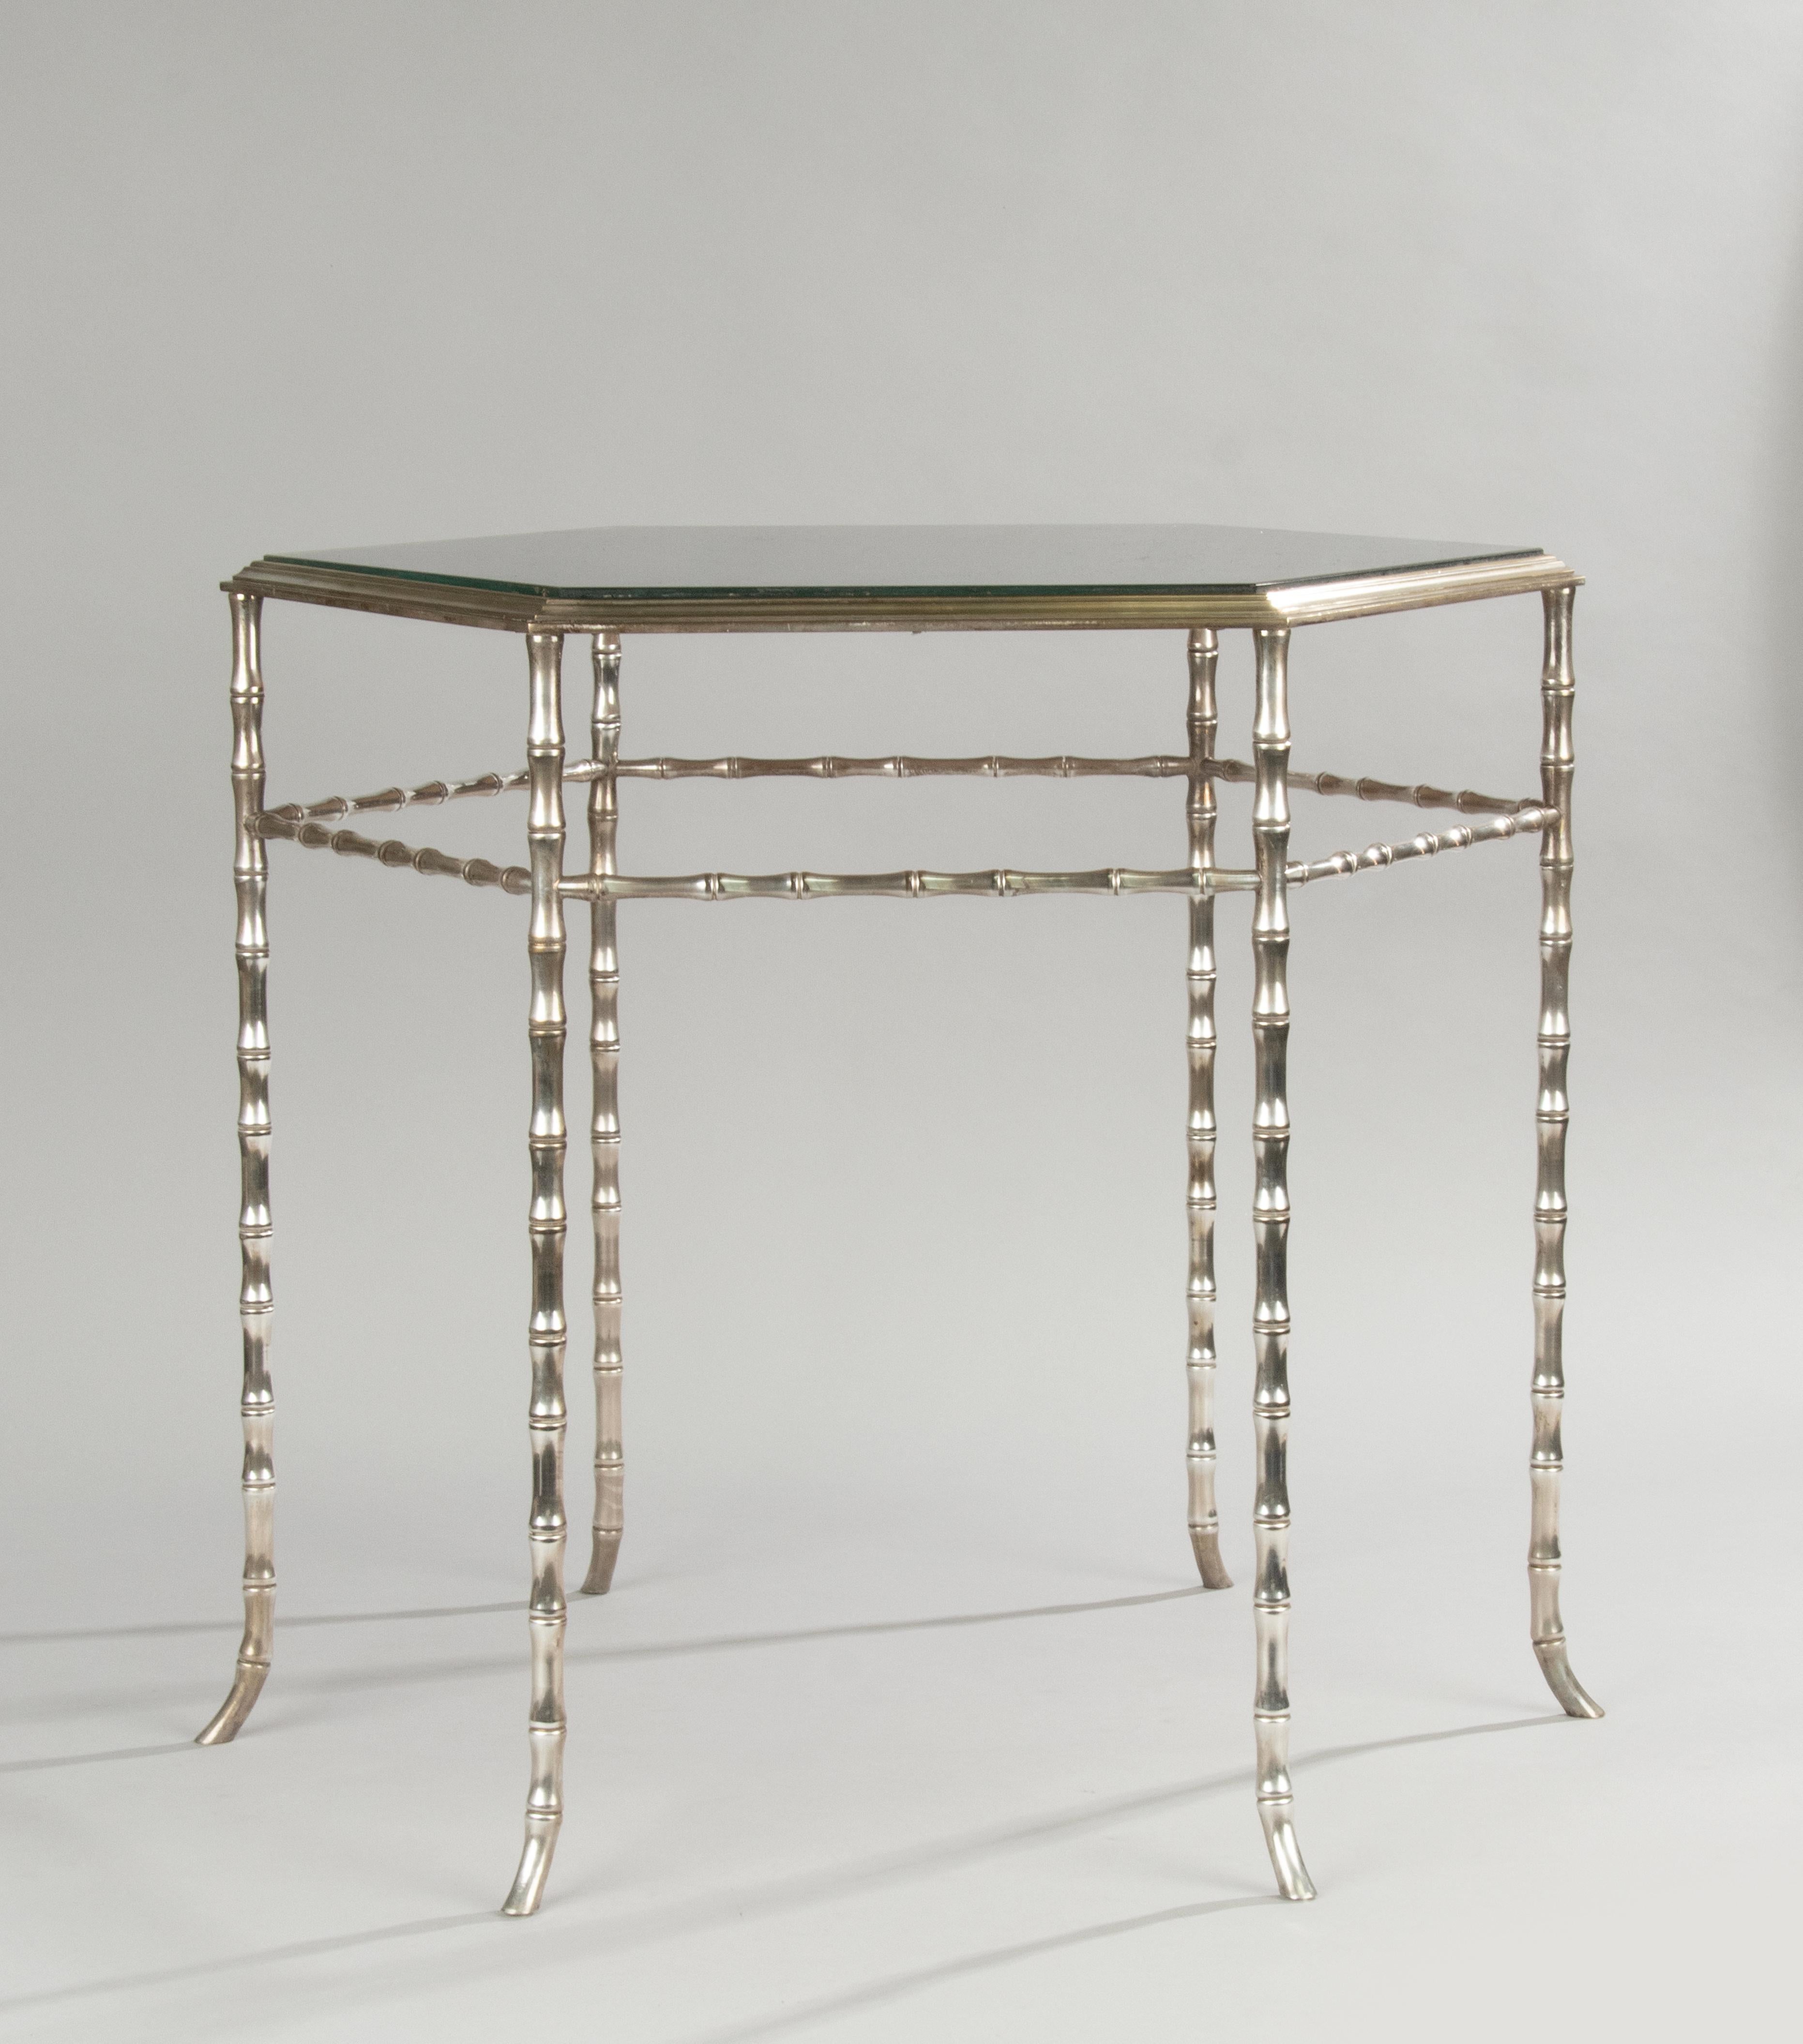 A stylish faux bamboo Hexagonal coffee or side table, attributed to Maison Baguès, France. The base is made of nickel plated solid brass. With a smoked glass top. In good and stable condition. Made in France, around 1960-1970. 
Dimensions: 55 (h)